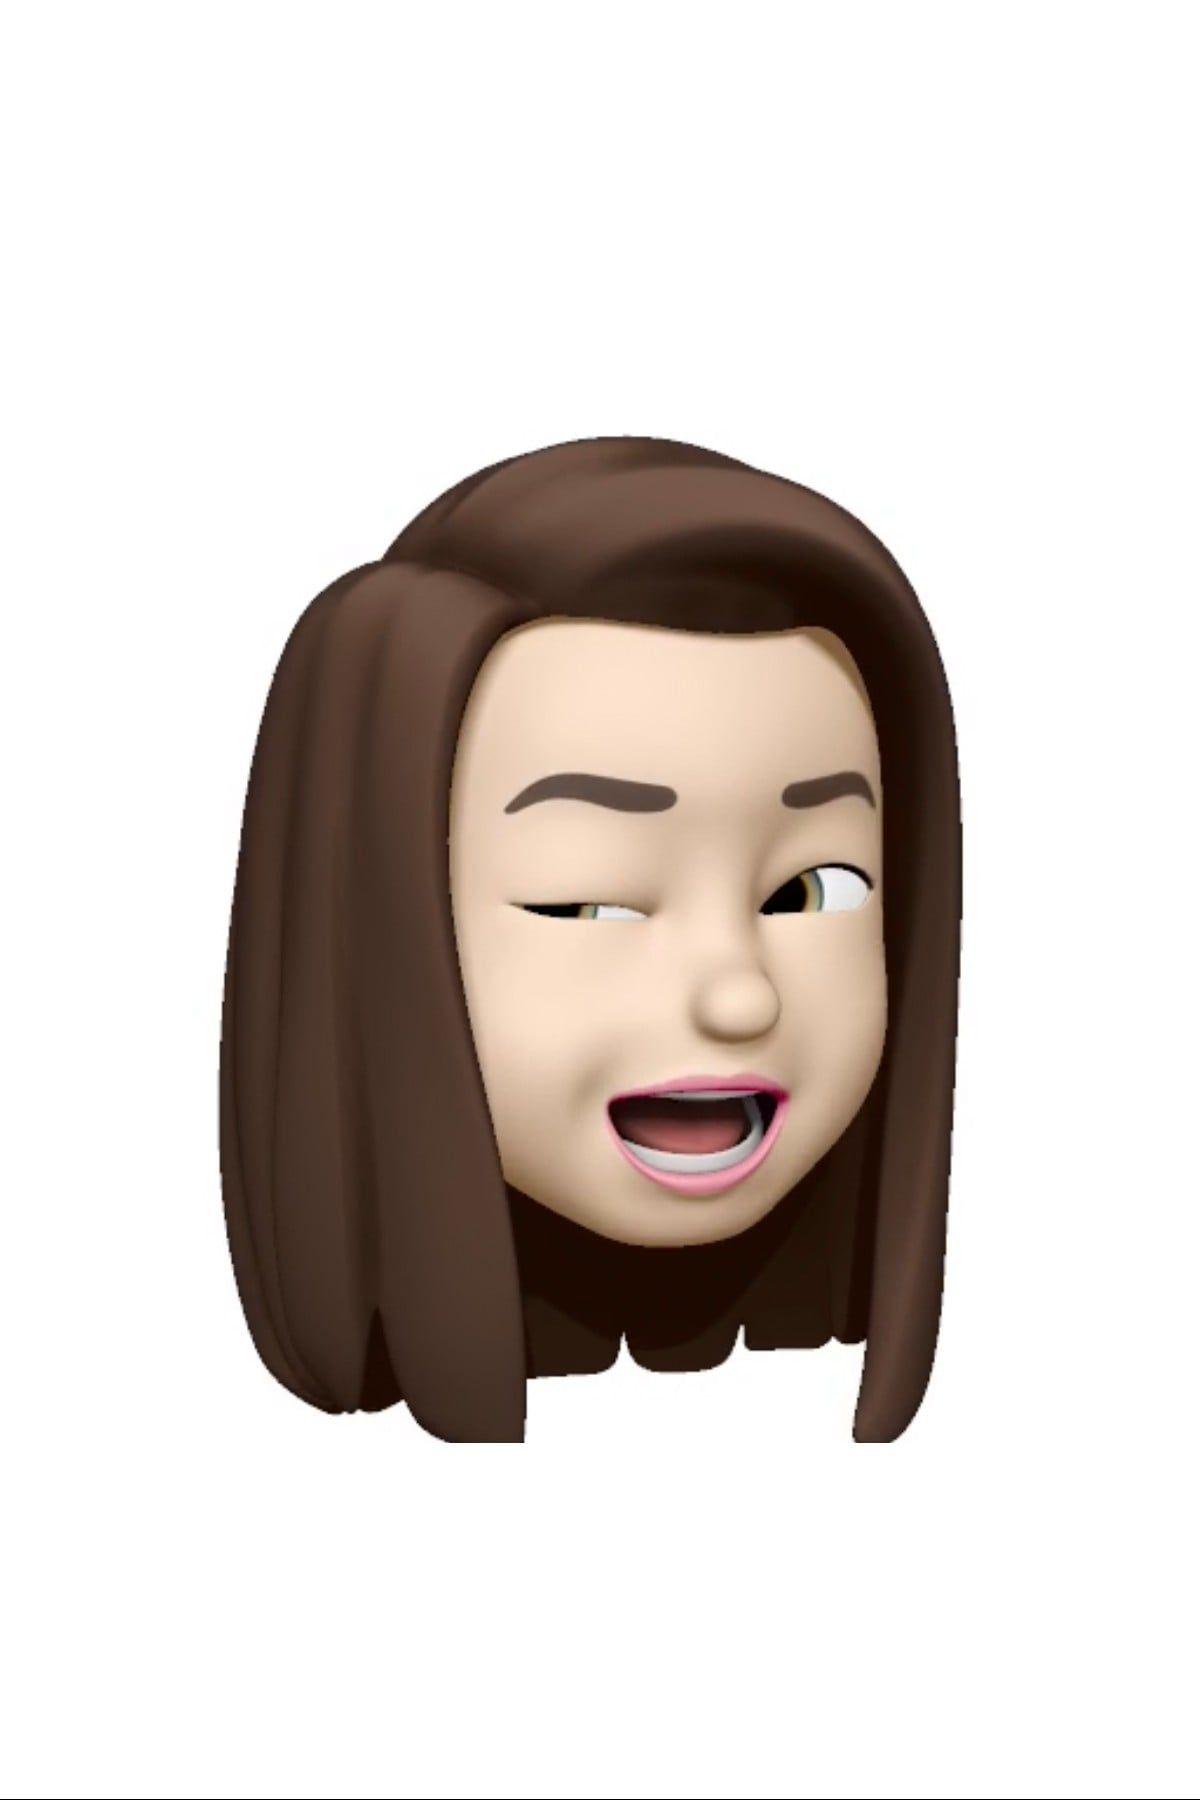 How to Make Your Own Memoji: The Coolest New Feature